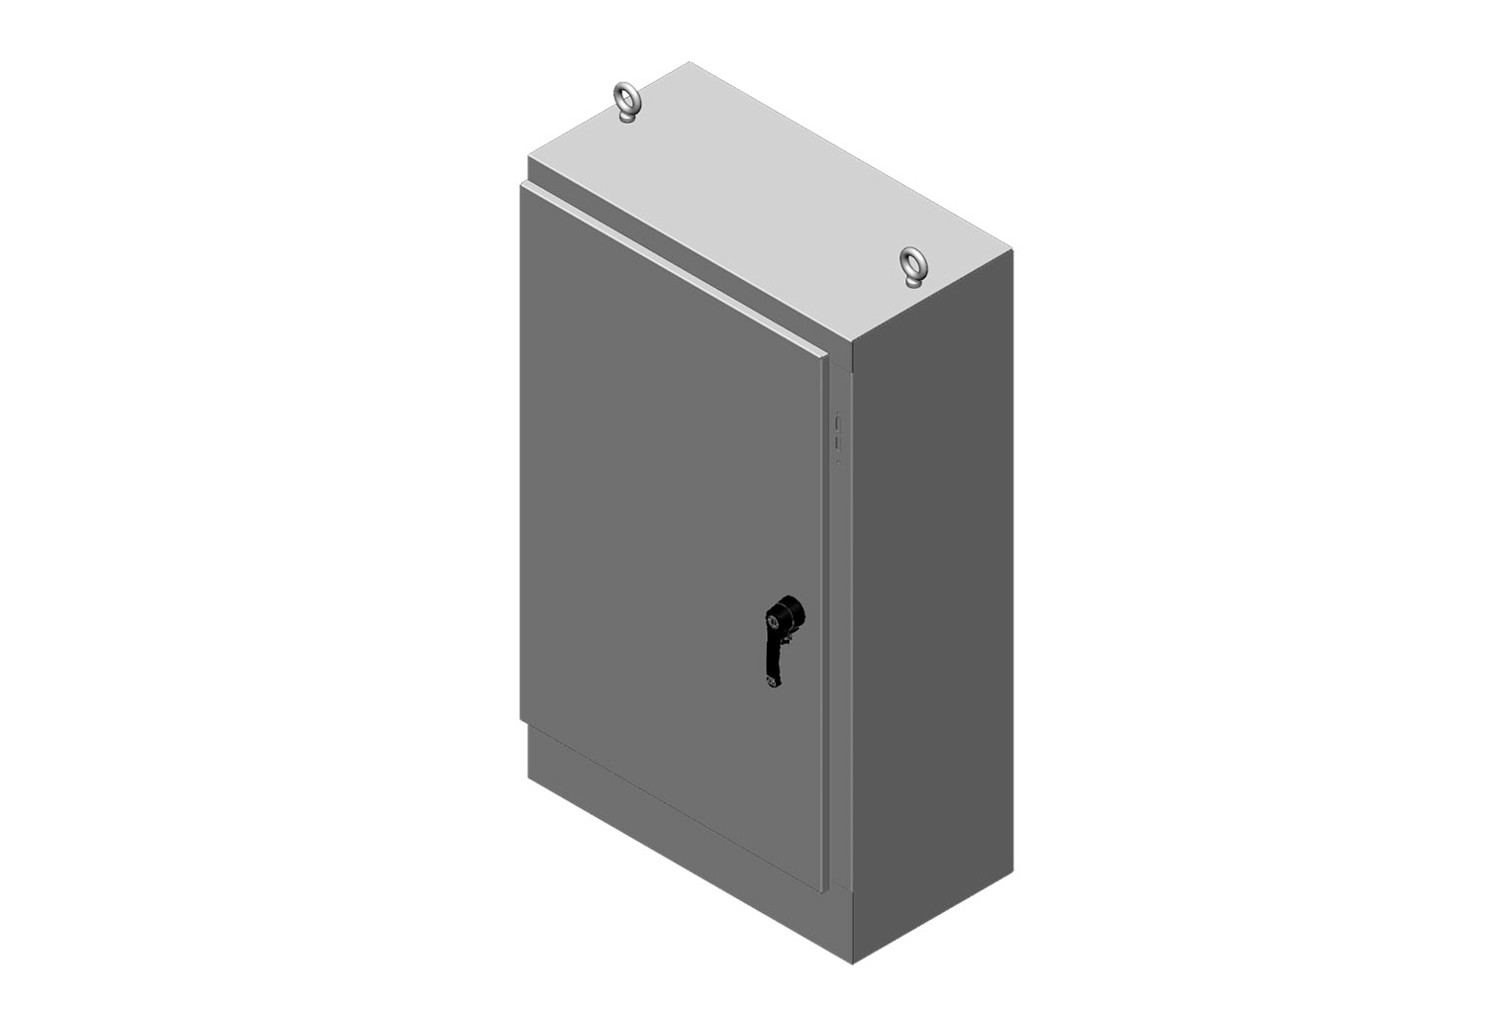 RMR Free-Standing Disconnect Enclosure, Type 4, with Solid Single Door - Image 5